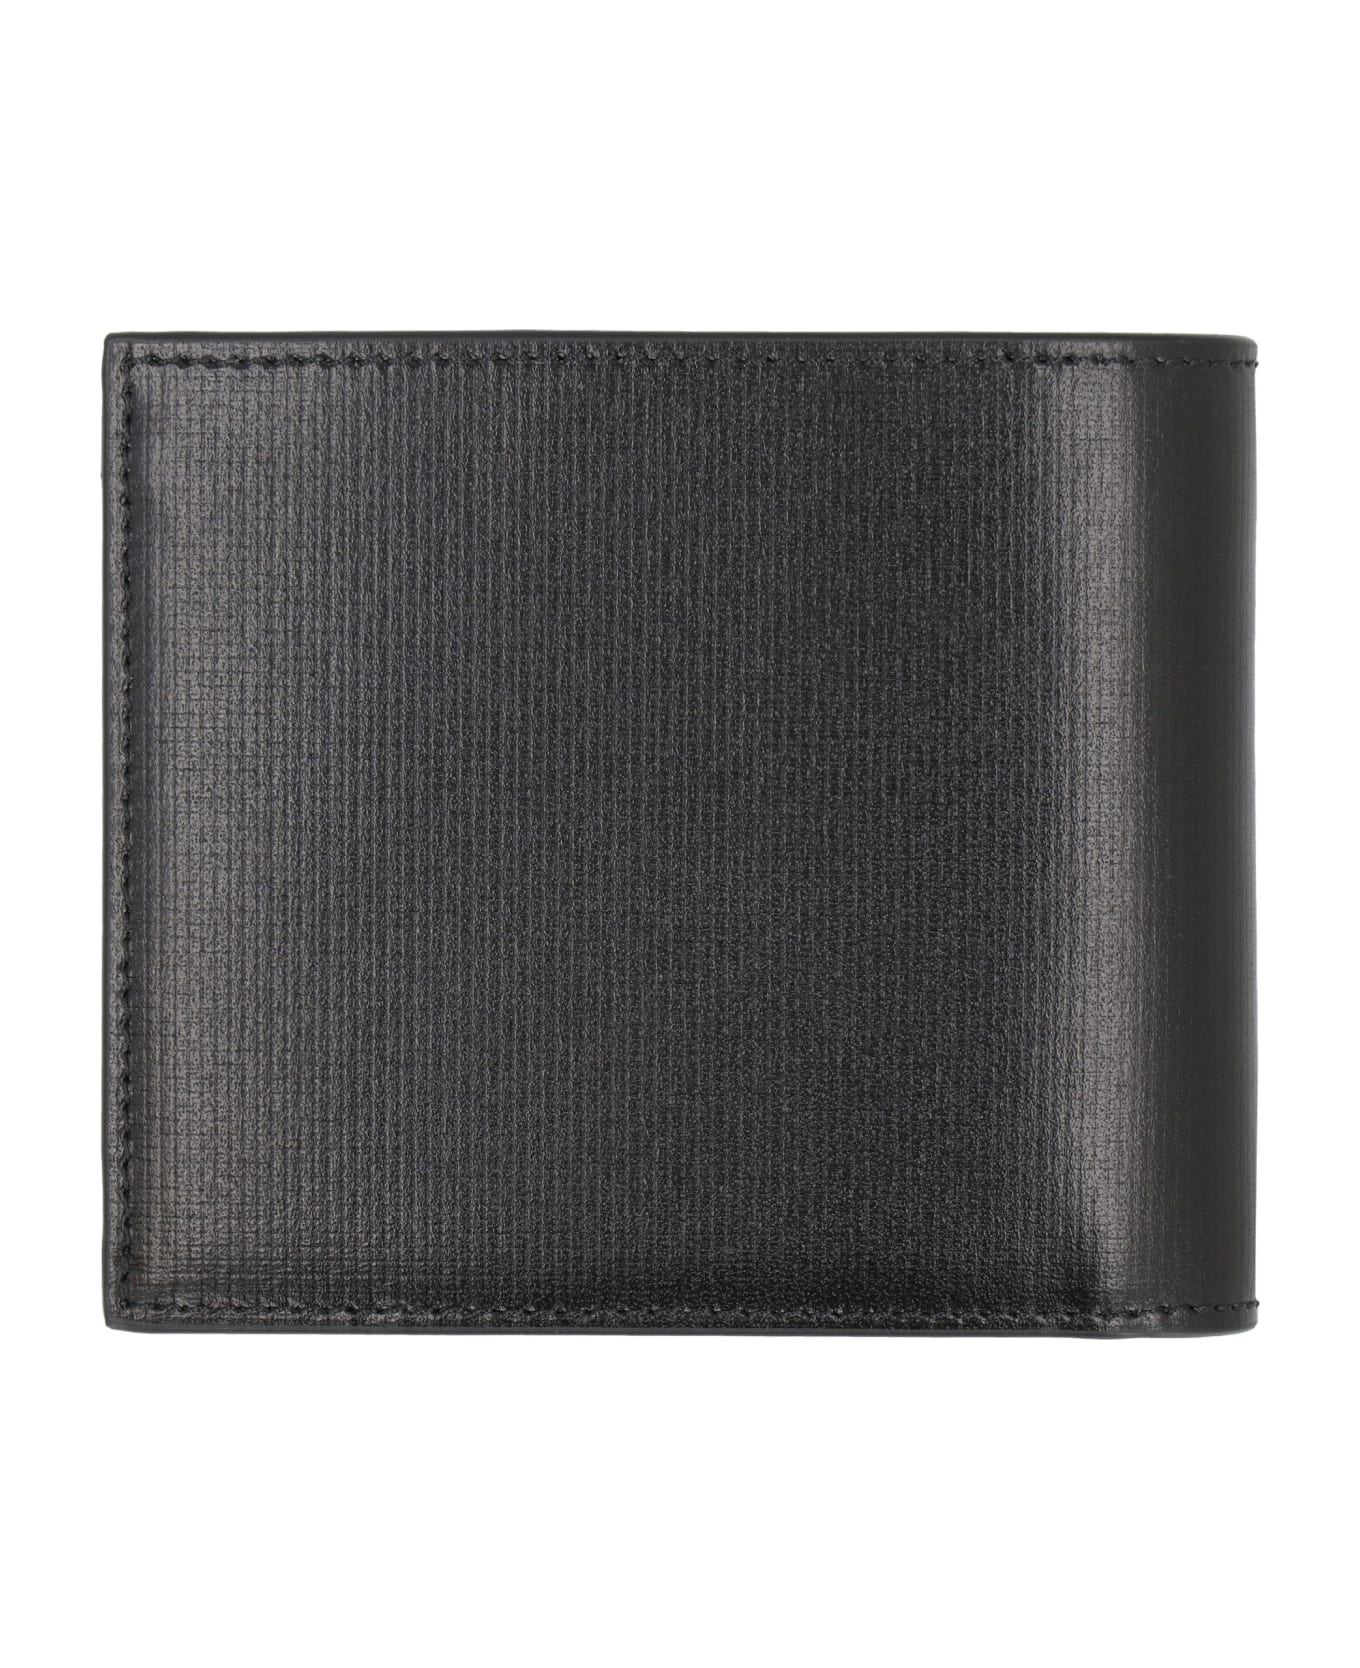 Givenchy Logo Leather Wallet - black